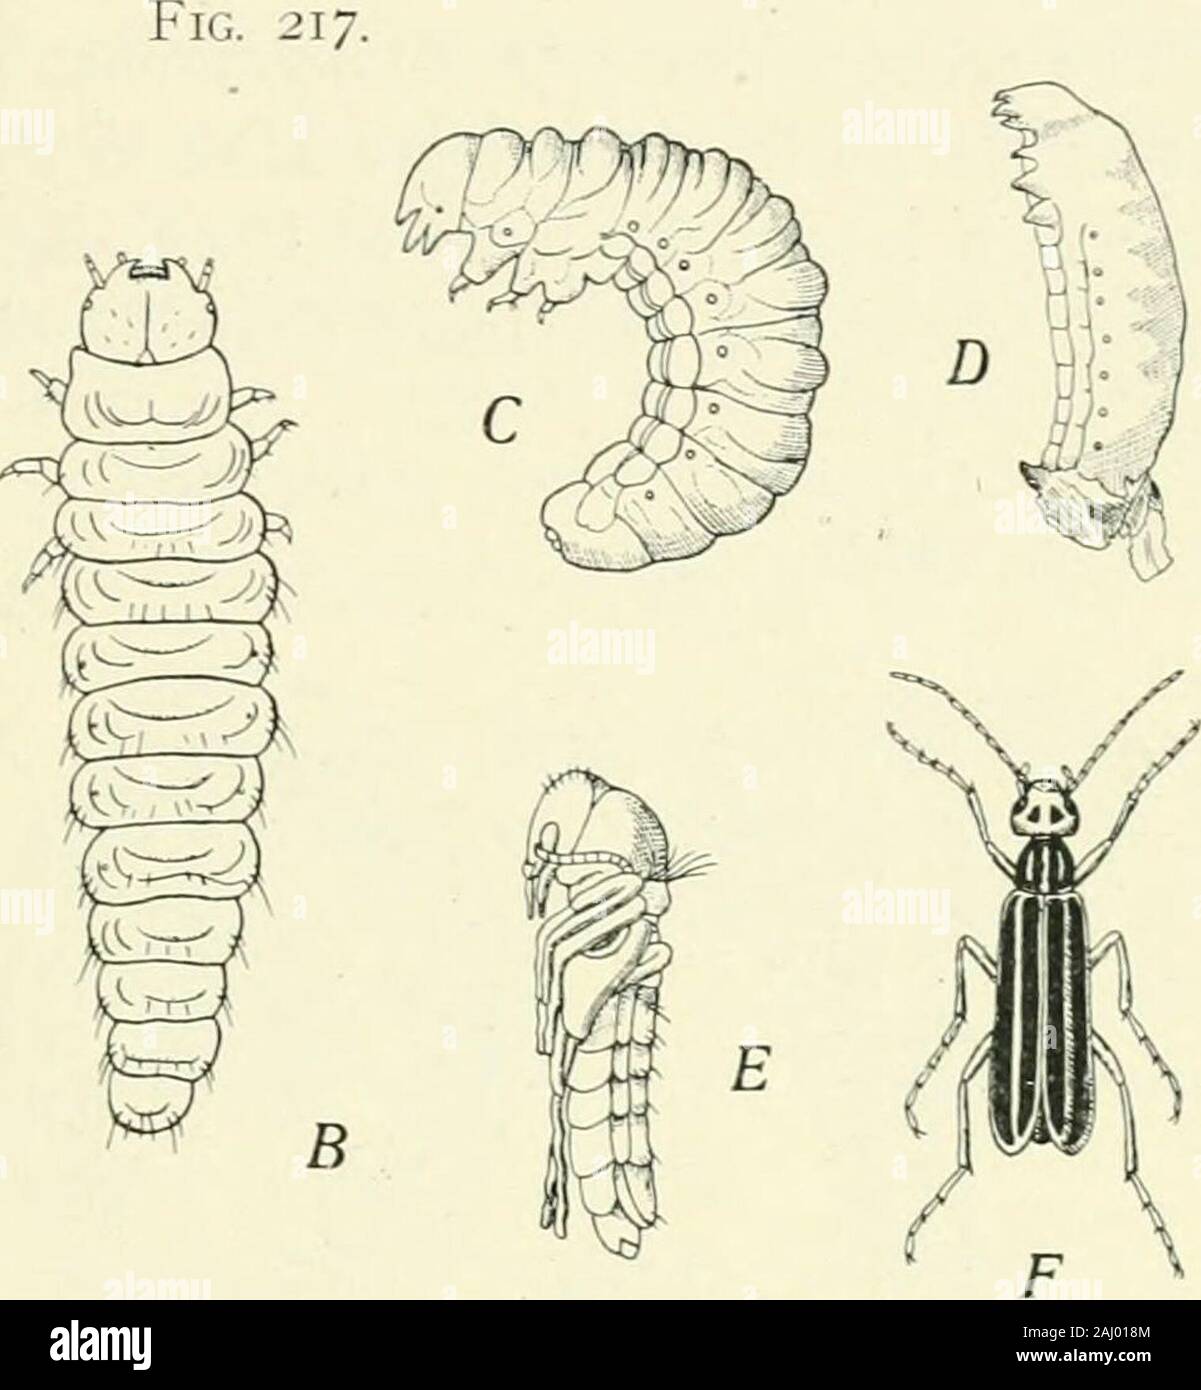 Entomology : with special reference to its biological and economic aspects . Stages in the hypermetamorphosis of Et&gt;icauta. A, triiingvilin; B, carabidoid stageof second larva; C, ultimate stage of second larva; D, coarctate larva; E, pupa; F,imago. E is species cinerea; the others are ziftiita. All enlarged except F.—AfterRiley, from Trans. St. Louis .cad. Science. and mouth parts are now rudimentary and the body morecompact than before. A third and a fourth moult occur withlittle change in the form of the second larxa. which is now inits nltiniafc stage (C). After the hfth moult, however Stock Photo